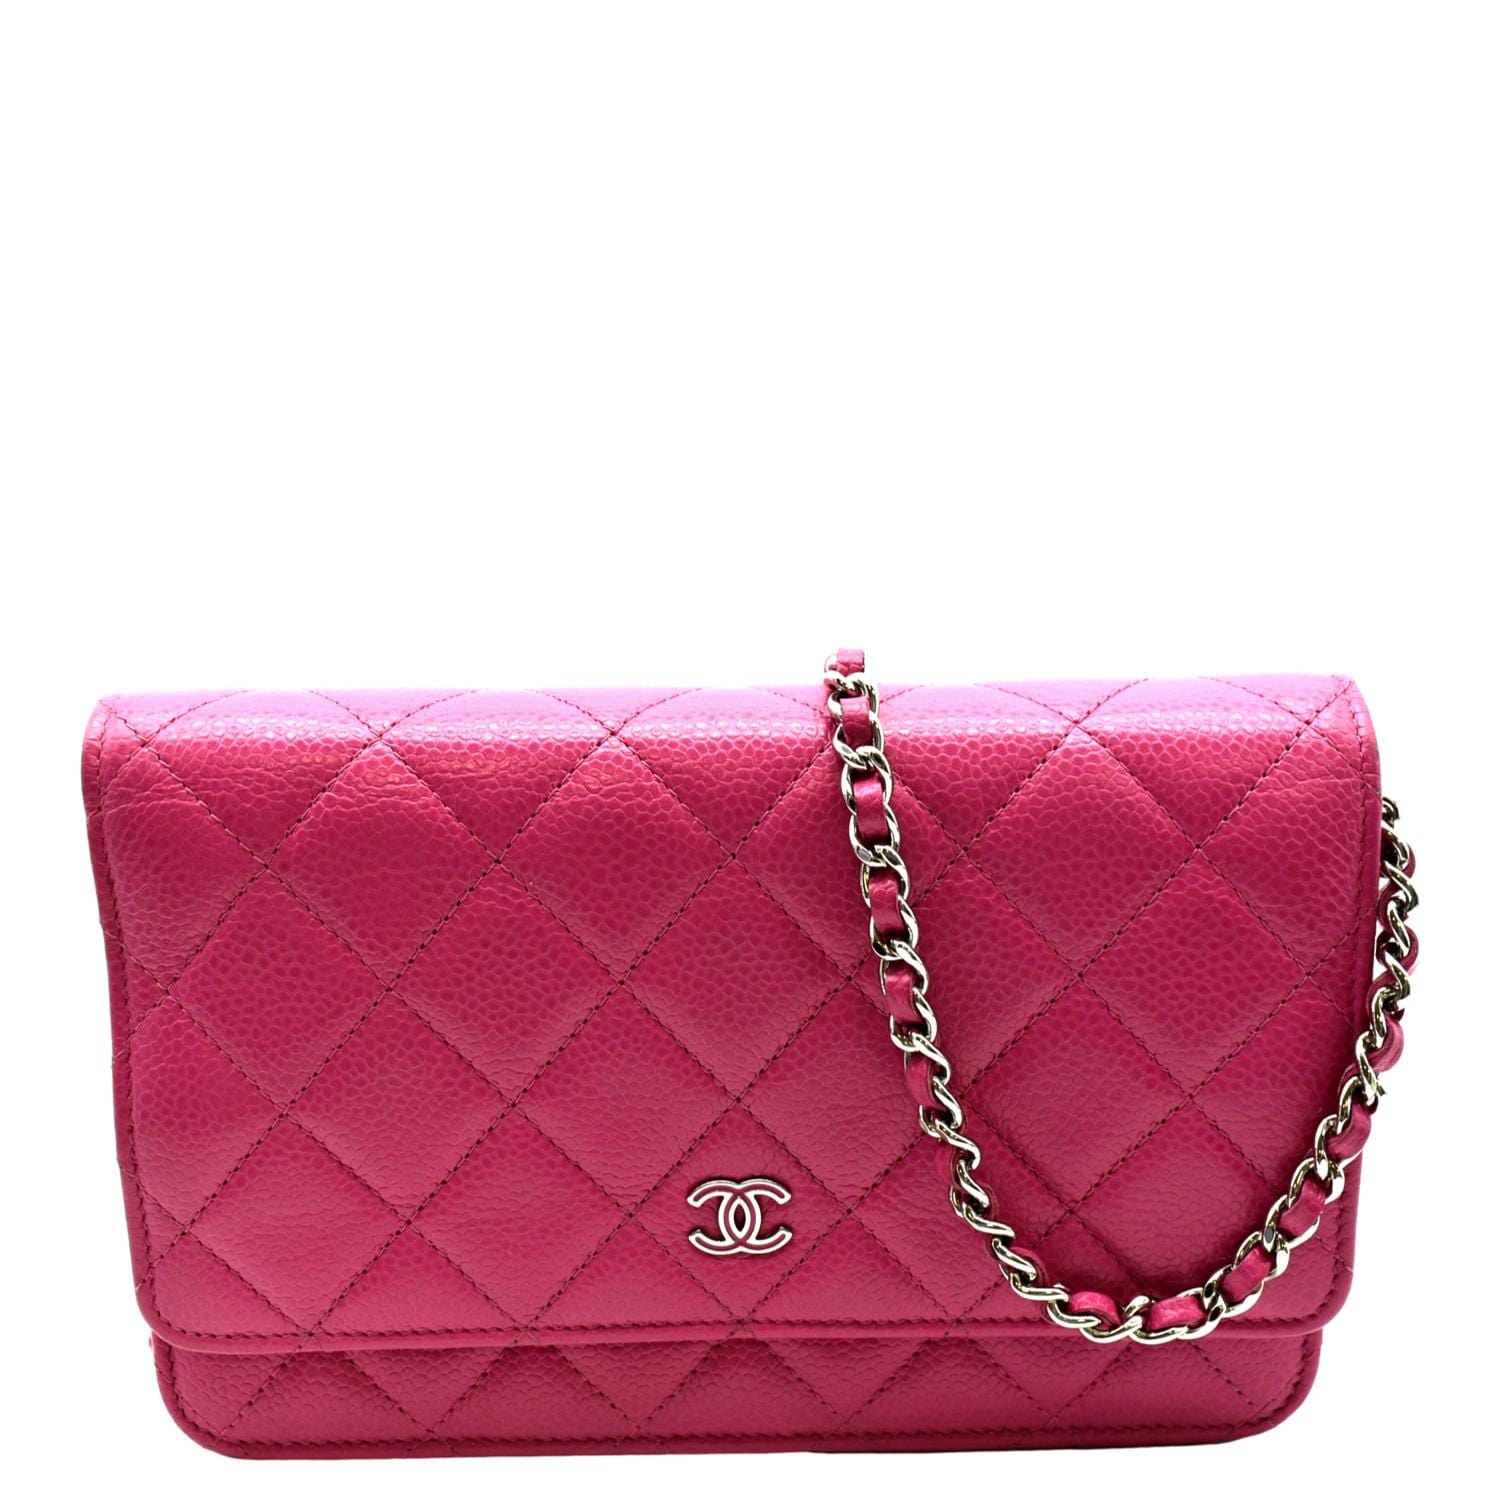 classic red chanel bag vintage